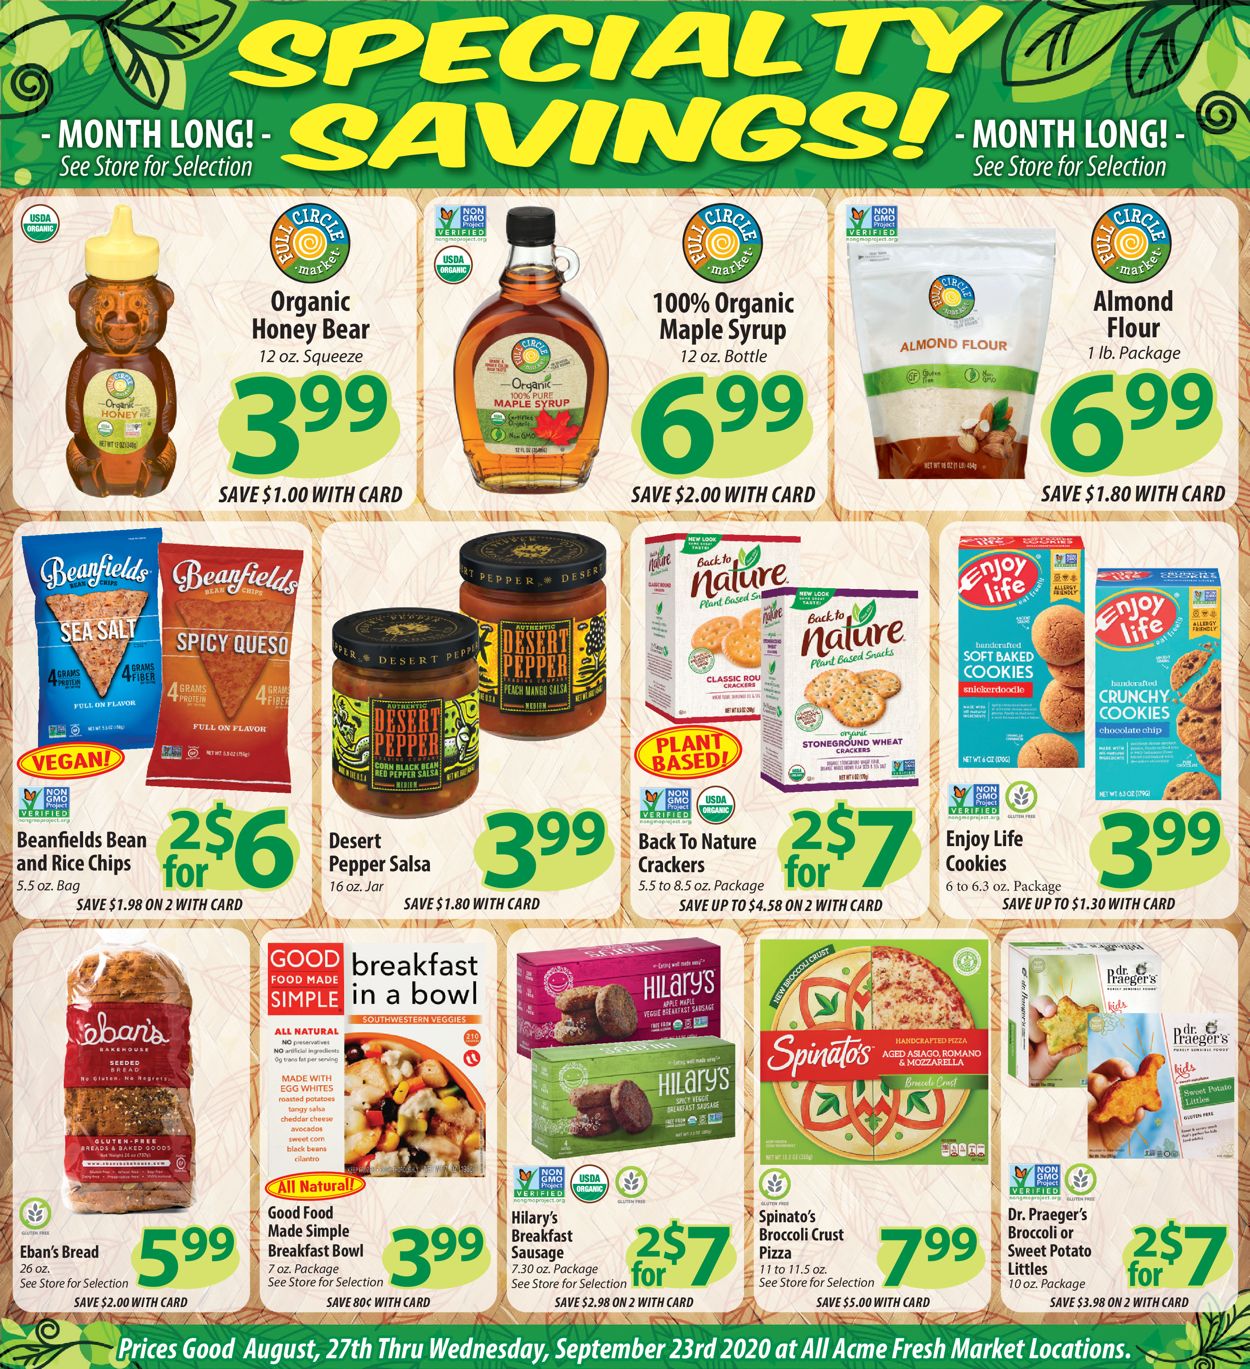 Acme Fresh Market Current weekly ad 09/10 09/16/2020 [15] frequent